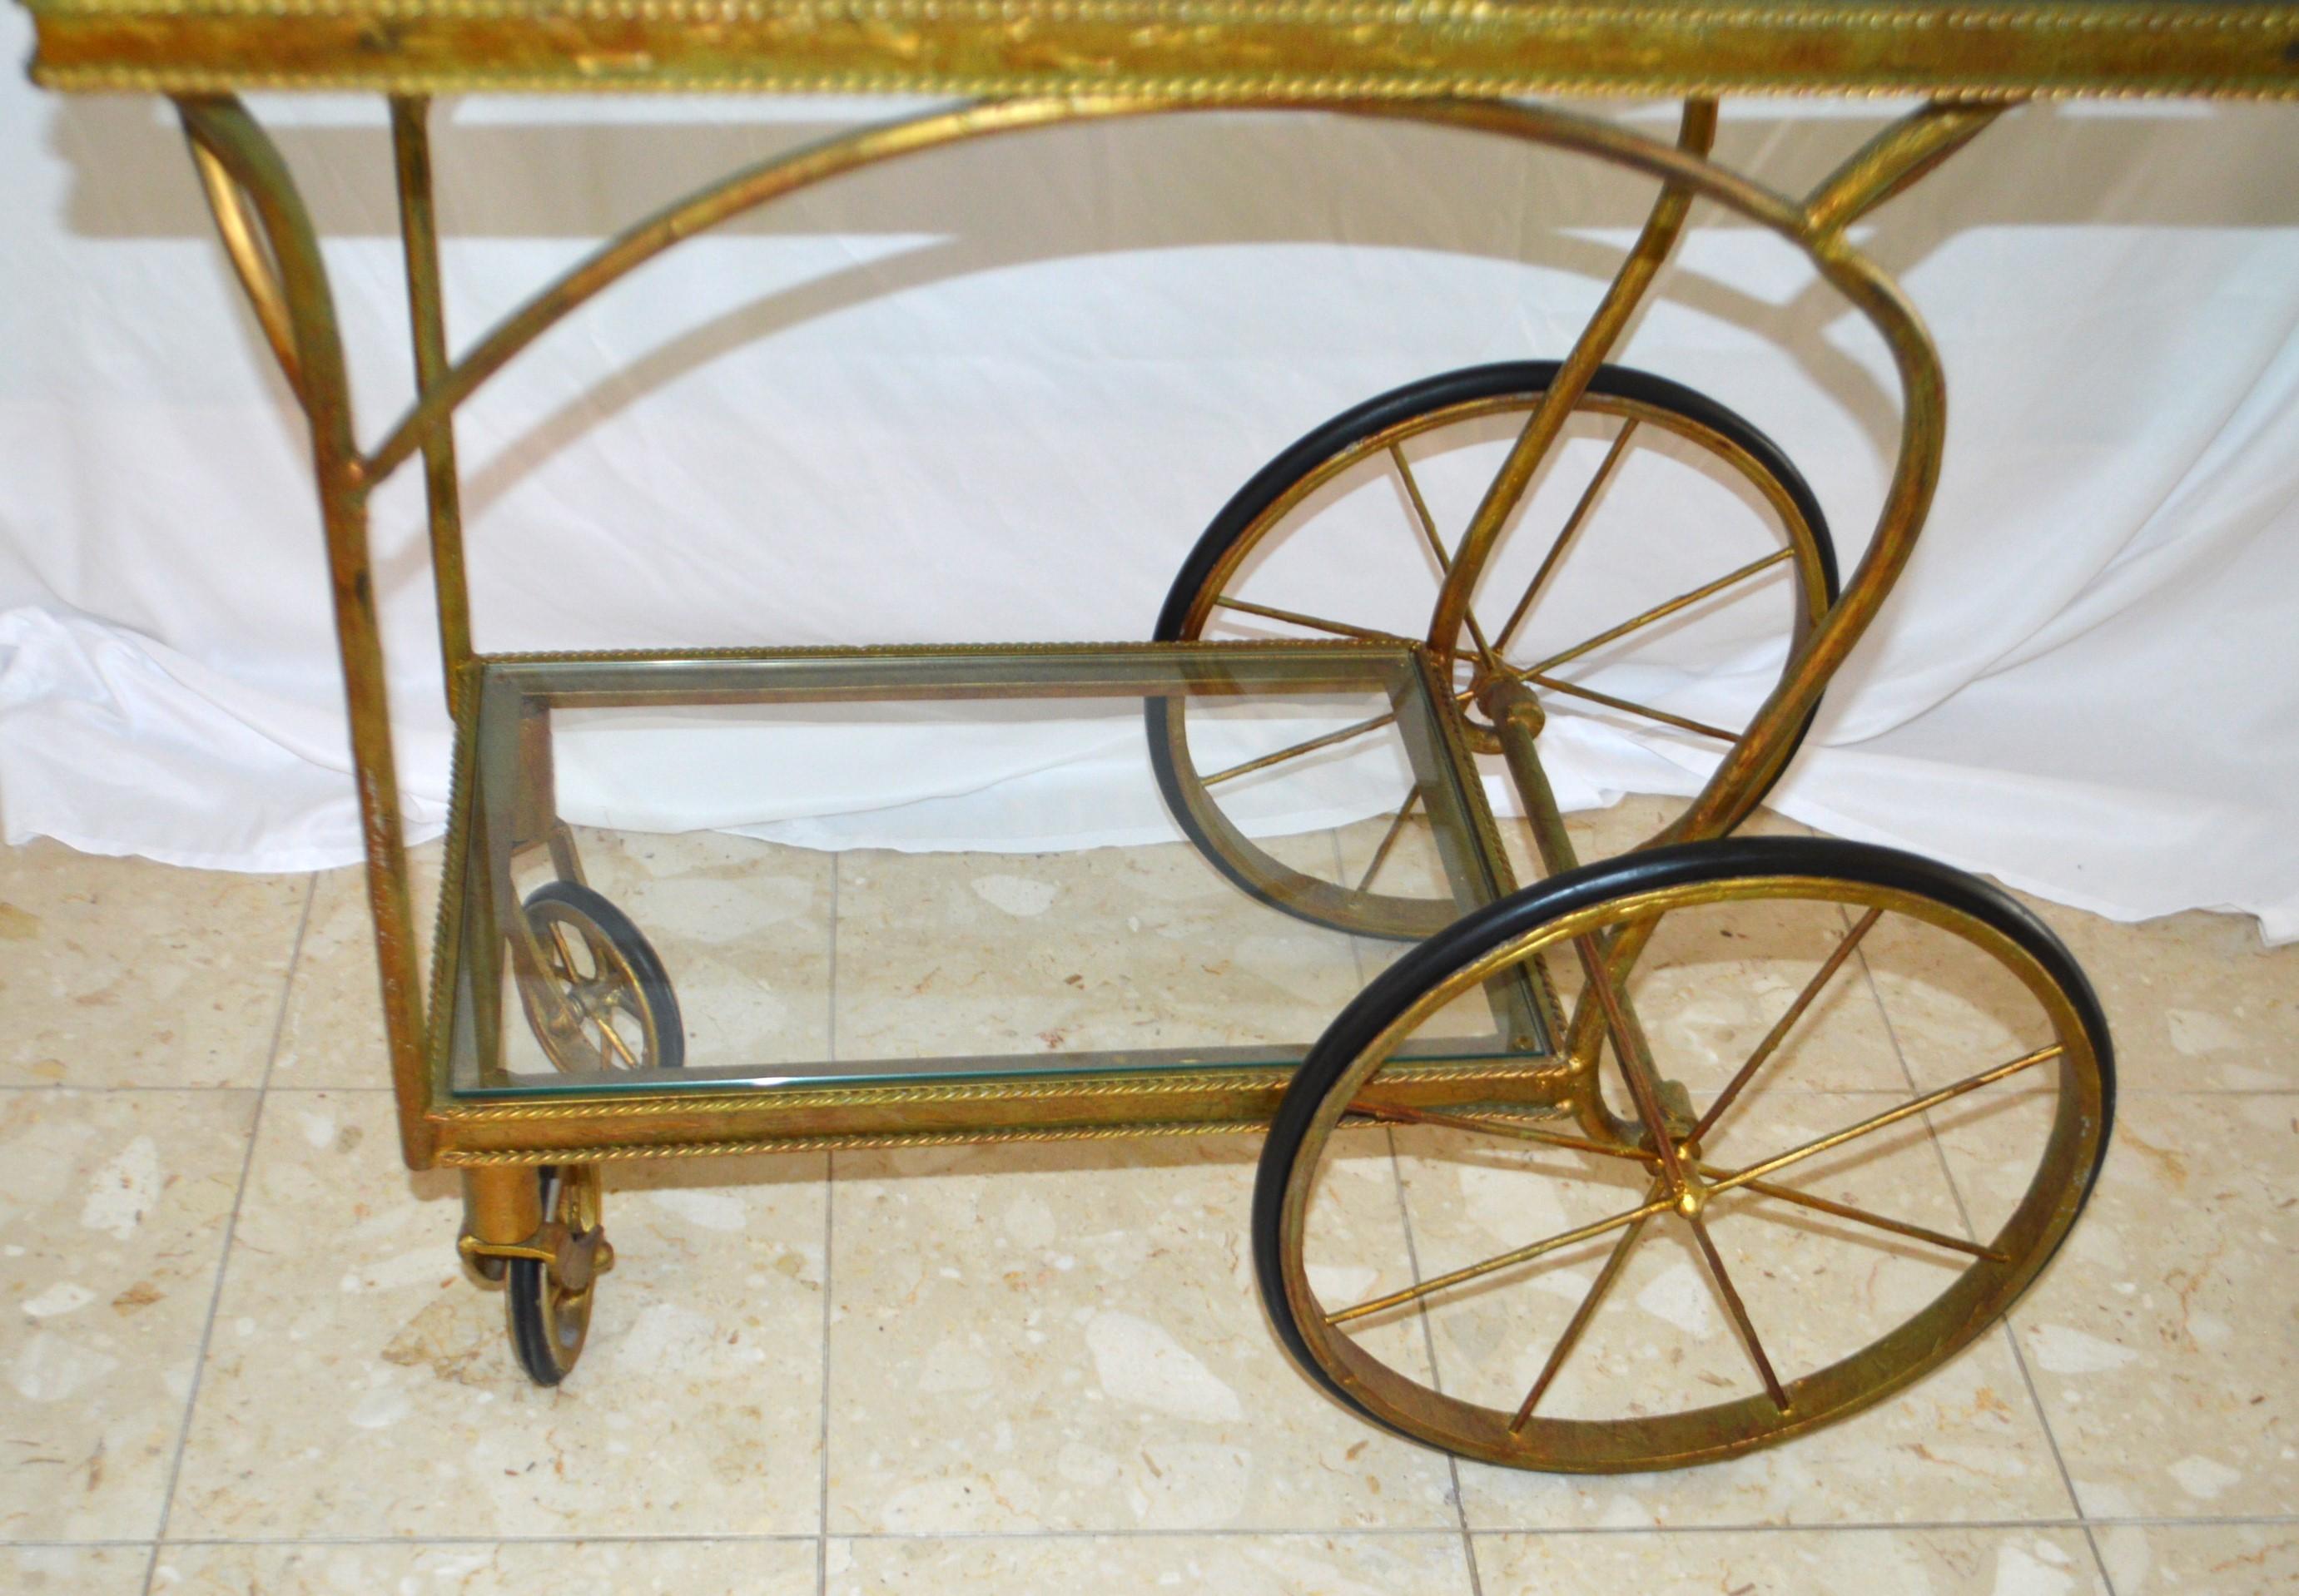 A Belle Époque Wrought  Iron Bar Cart having two levels, both with glass tops in good condition. To note is the decorative design of the molding around the glass.. There are two sets of wheels, the large one are working very smoothly, the smaller